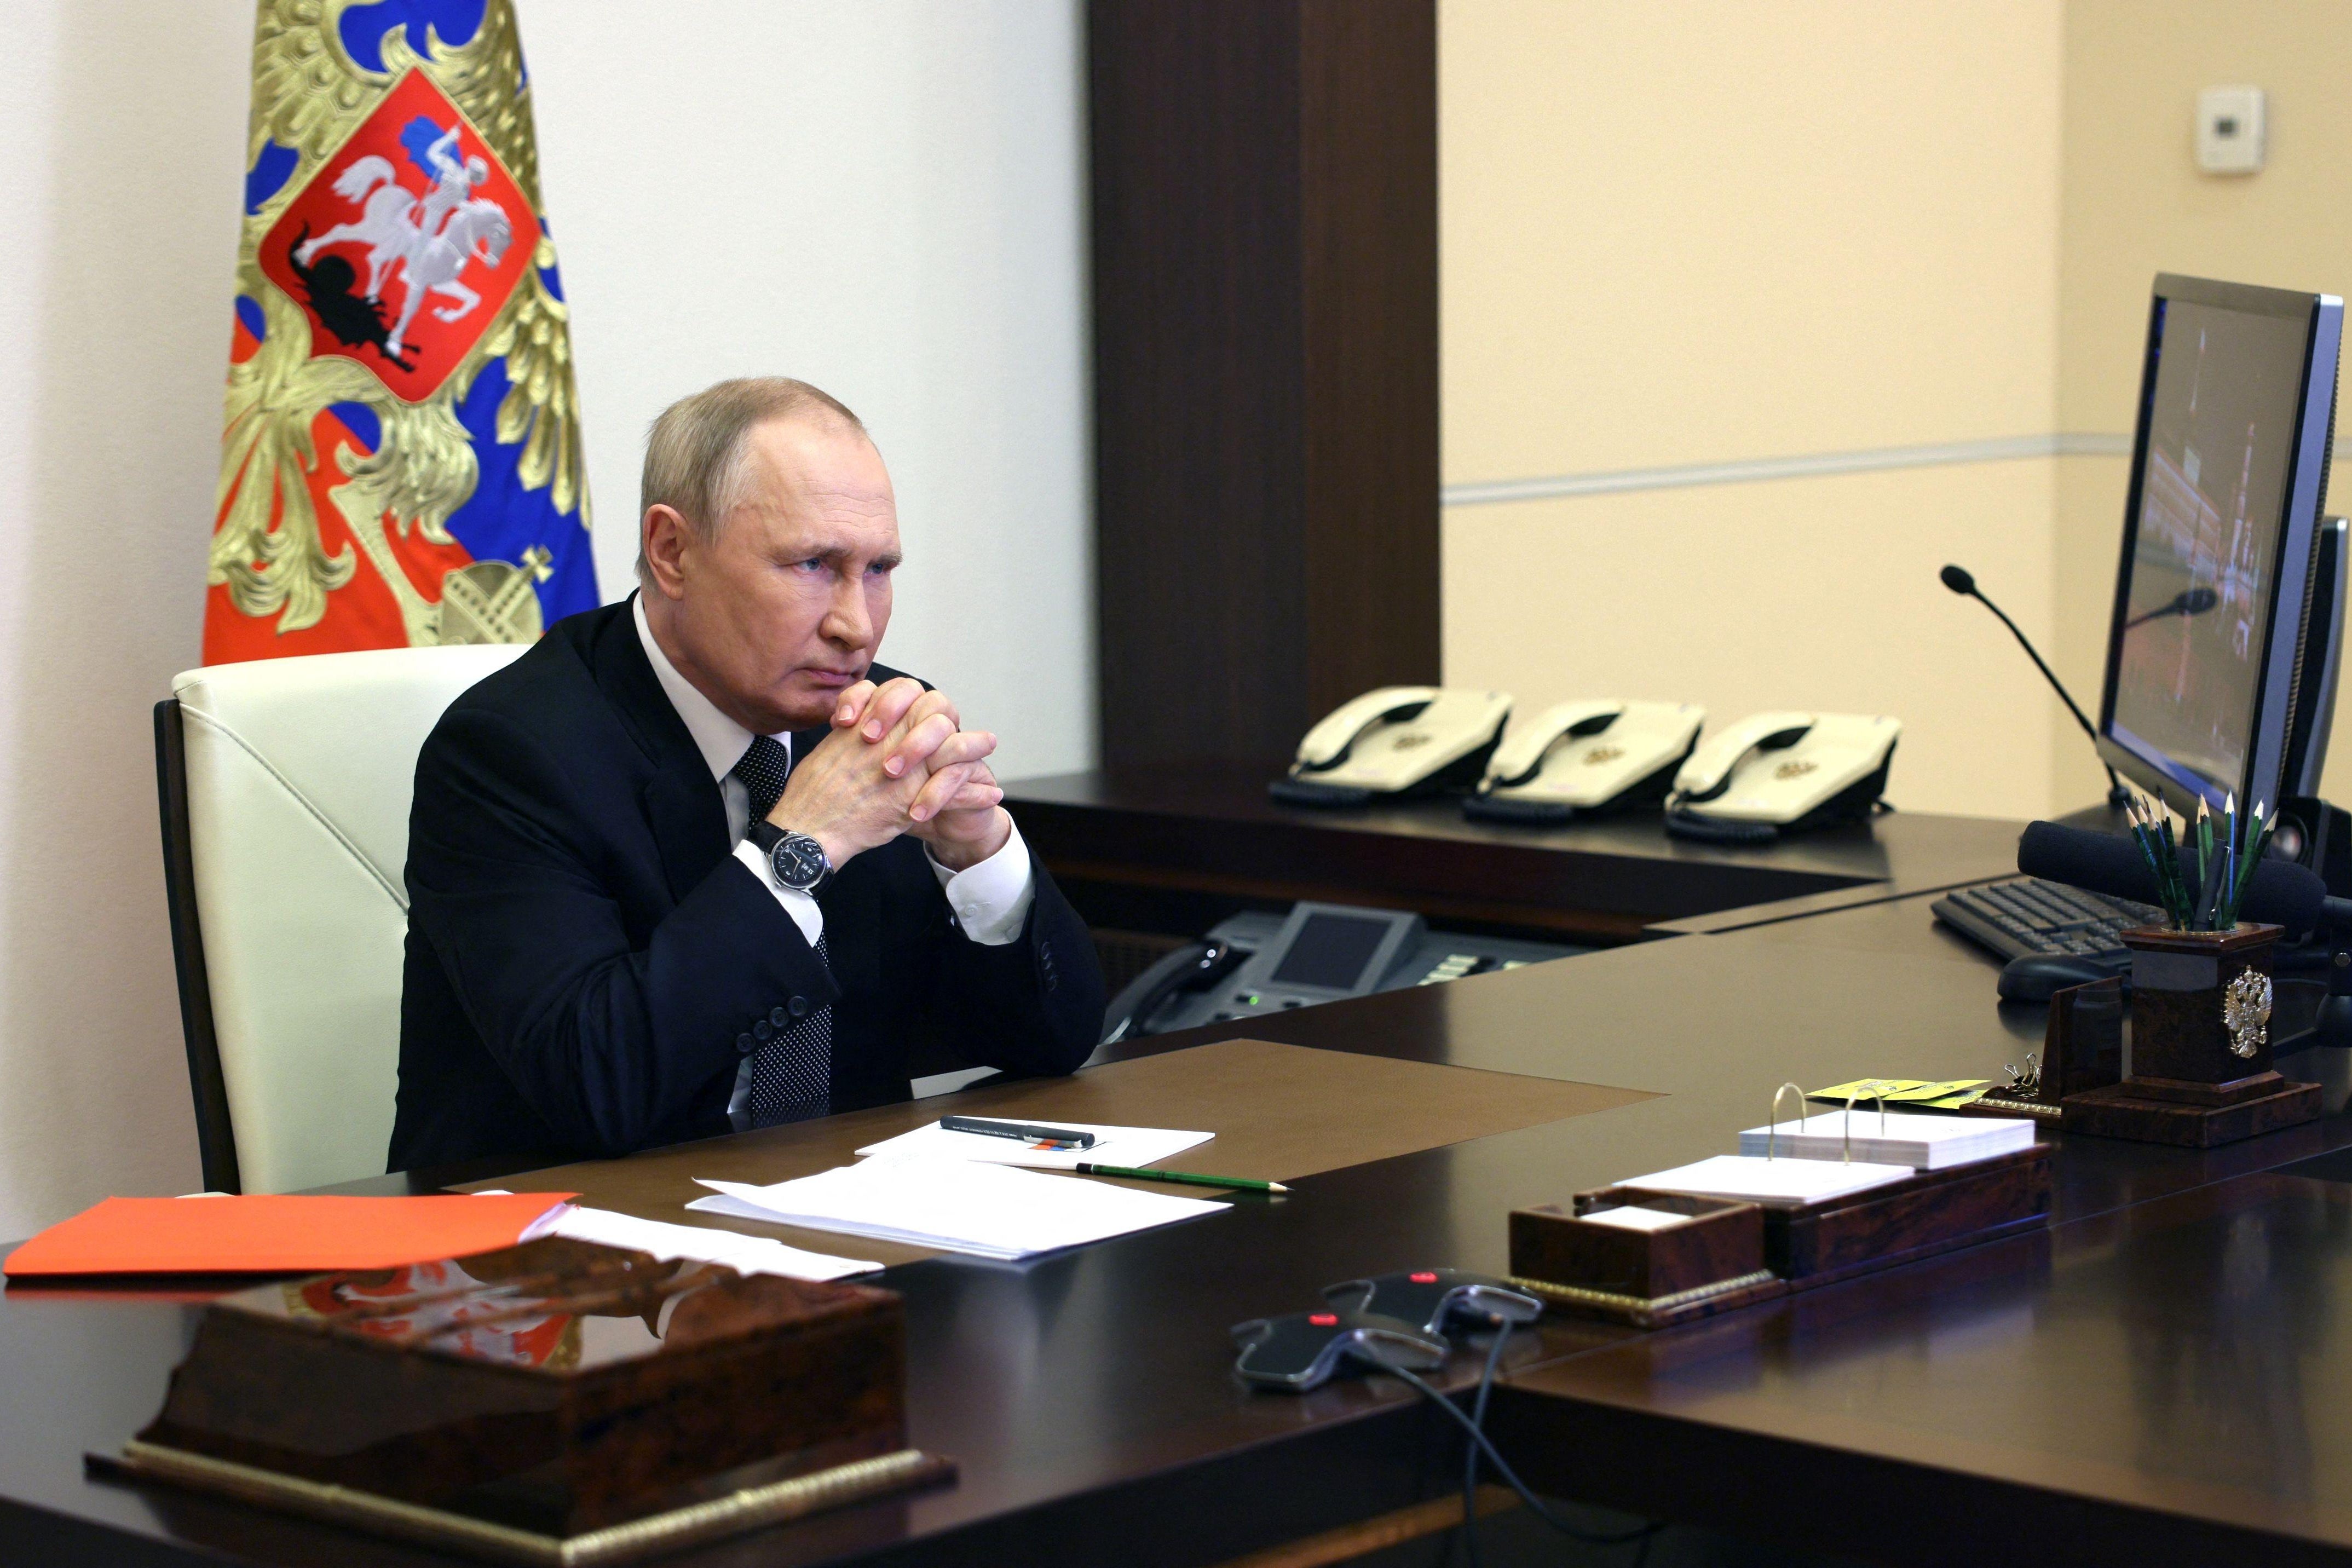 Vladimir Putin sits at a large desk, his elbows on the table, in front of a computer.